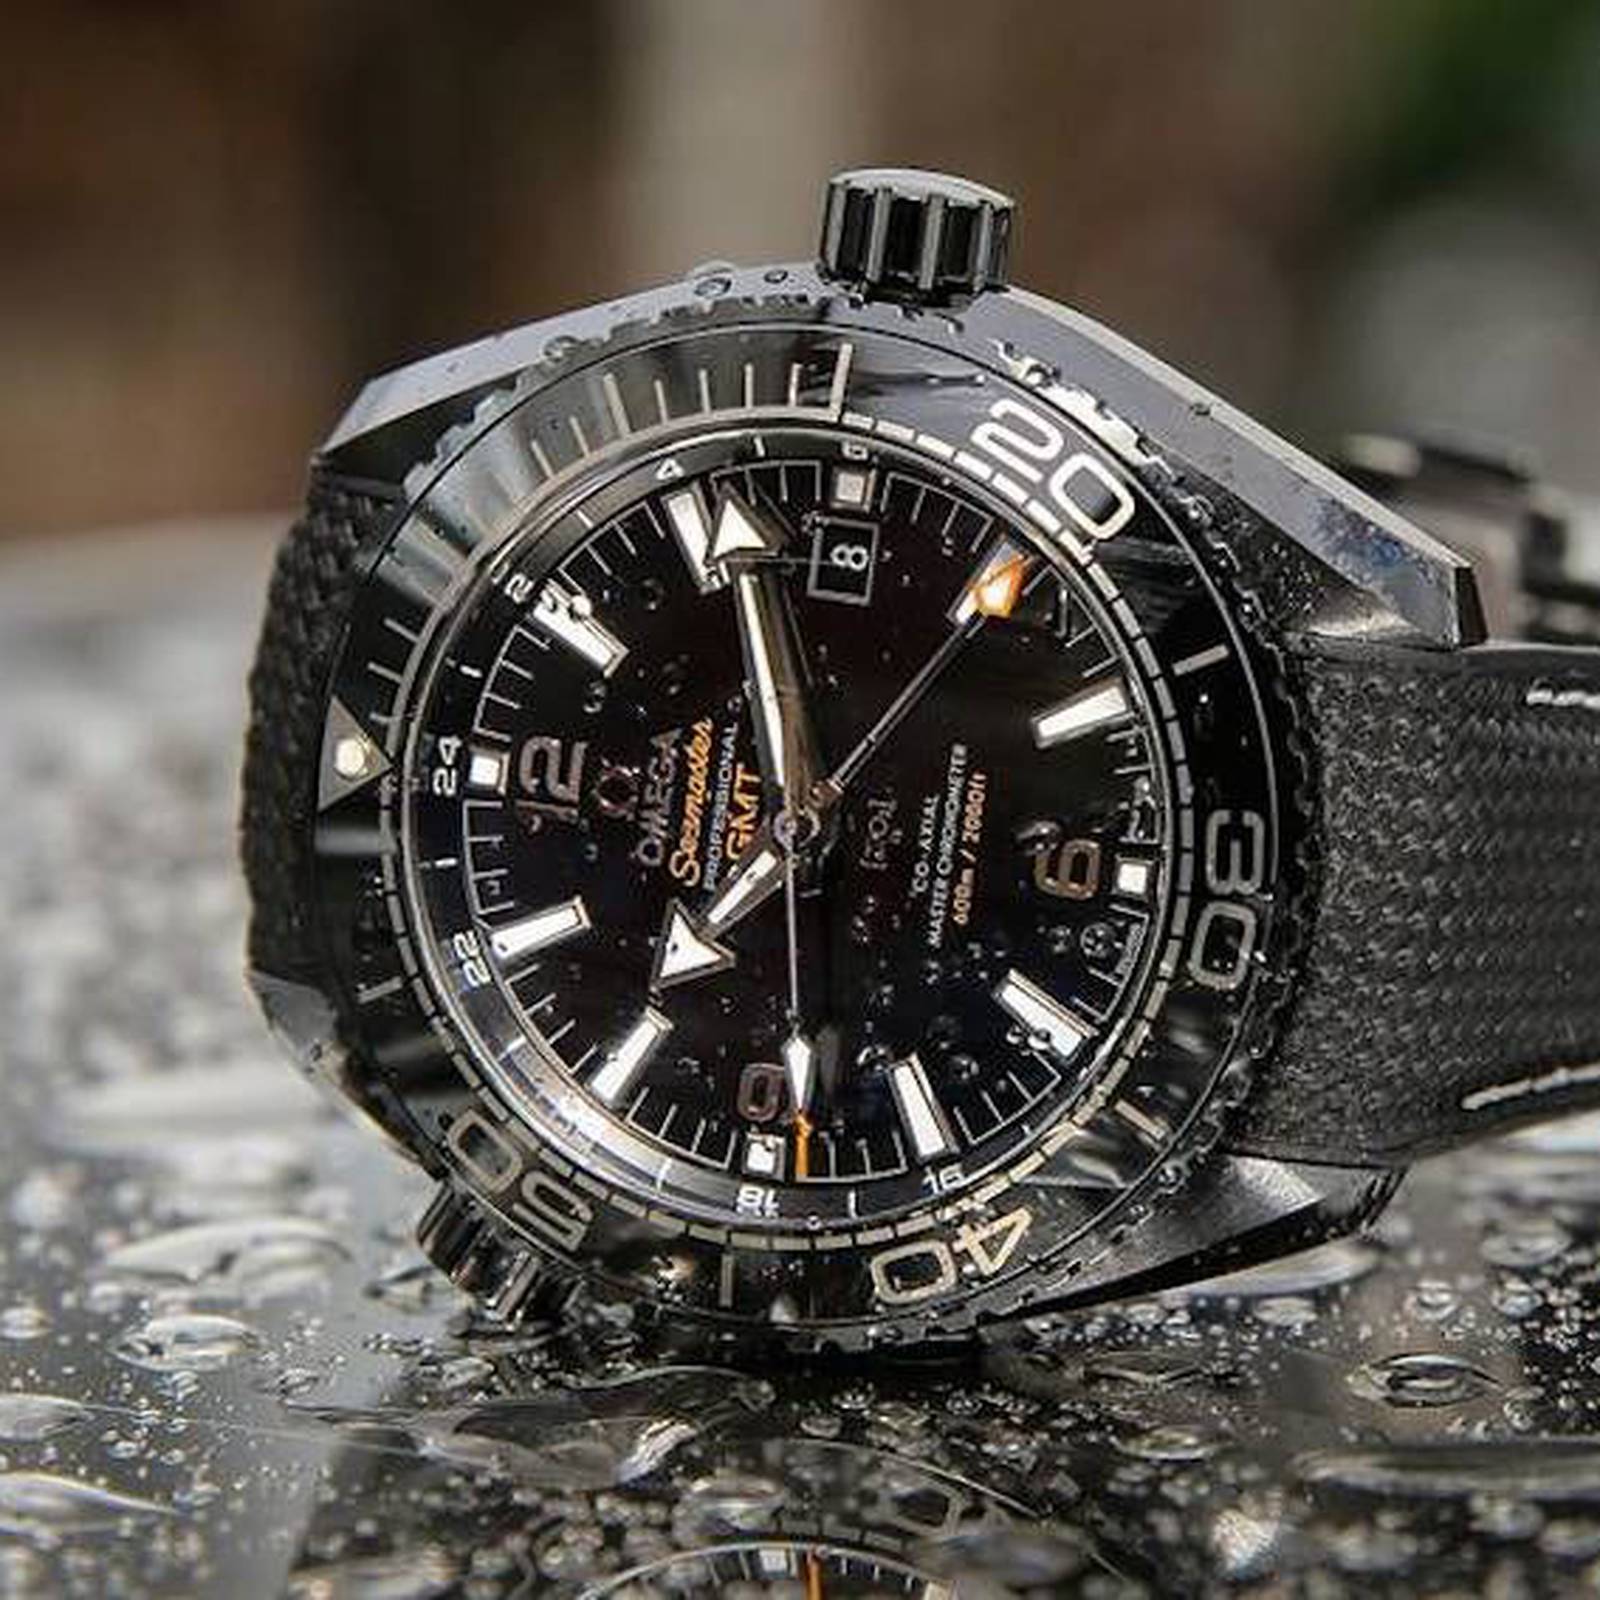 Omega Raises Luxury Watch Prices as Other Swatch Brands Struggle